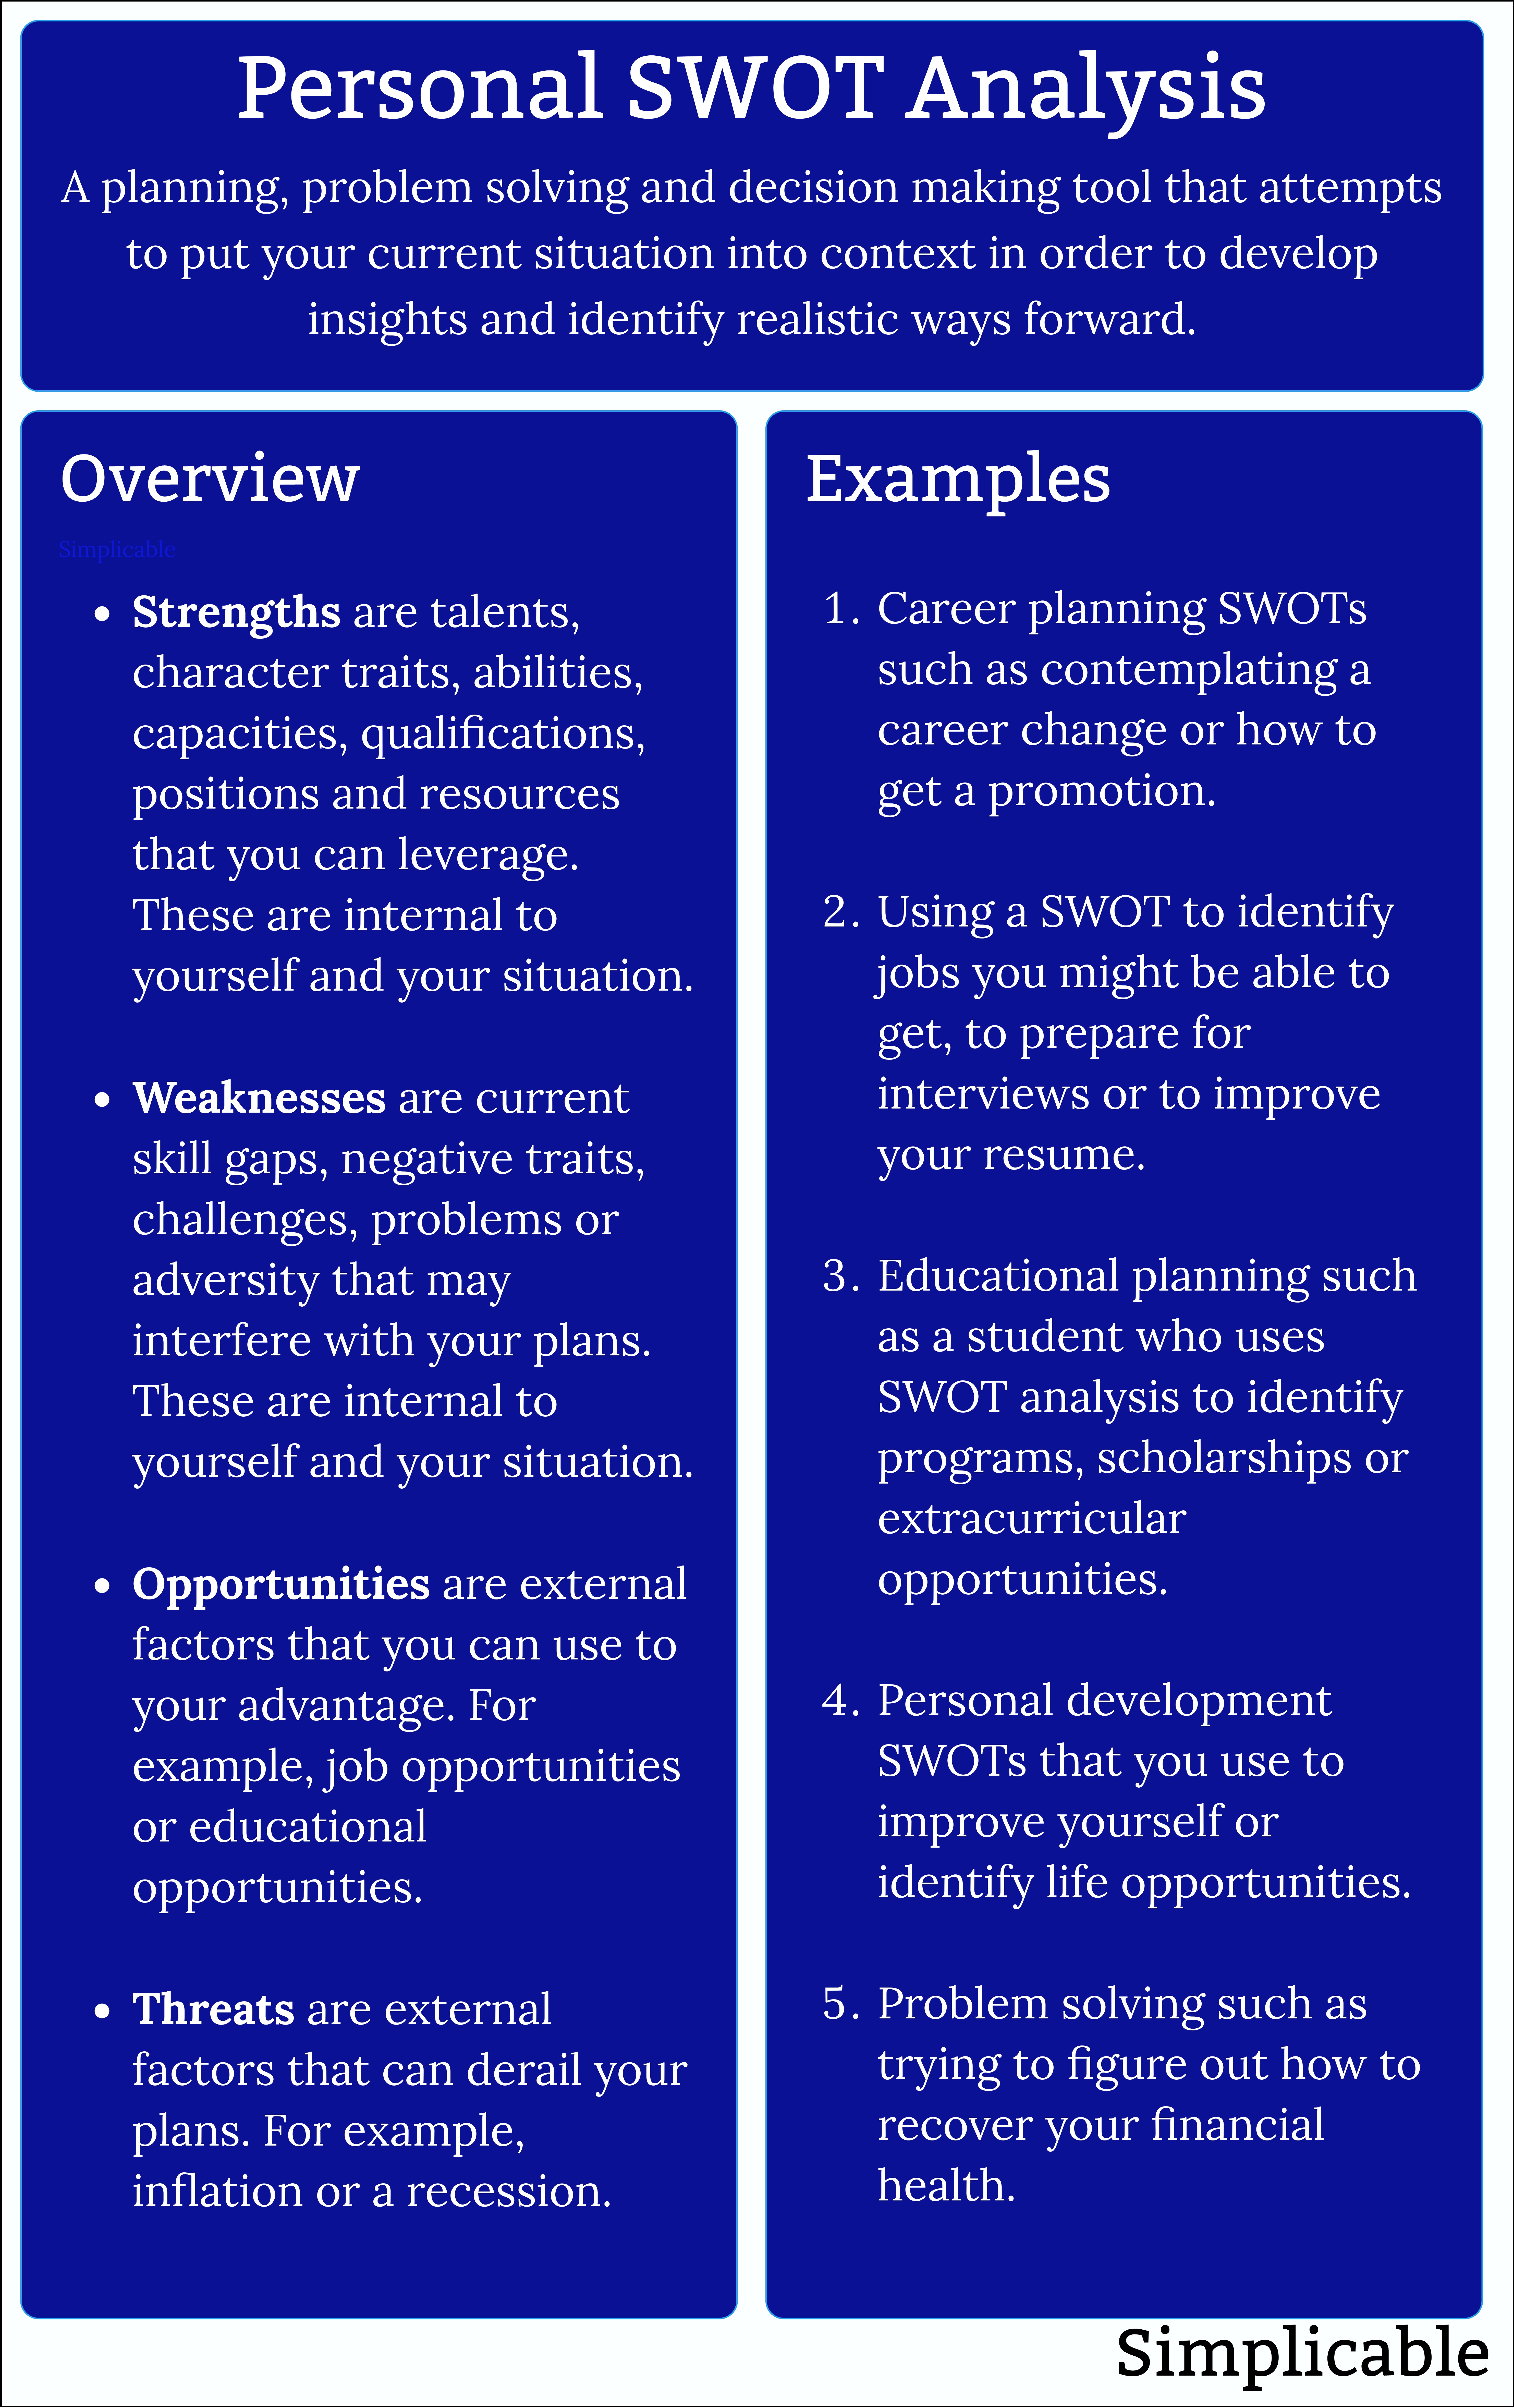 personal swot analysis definition and examples